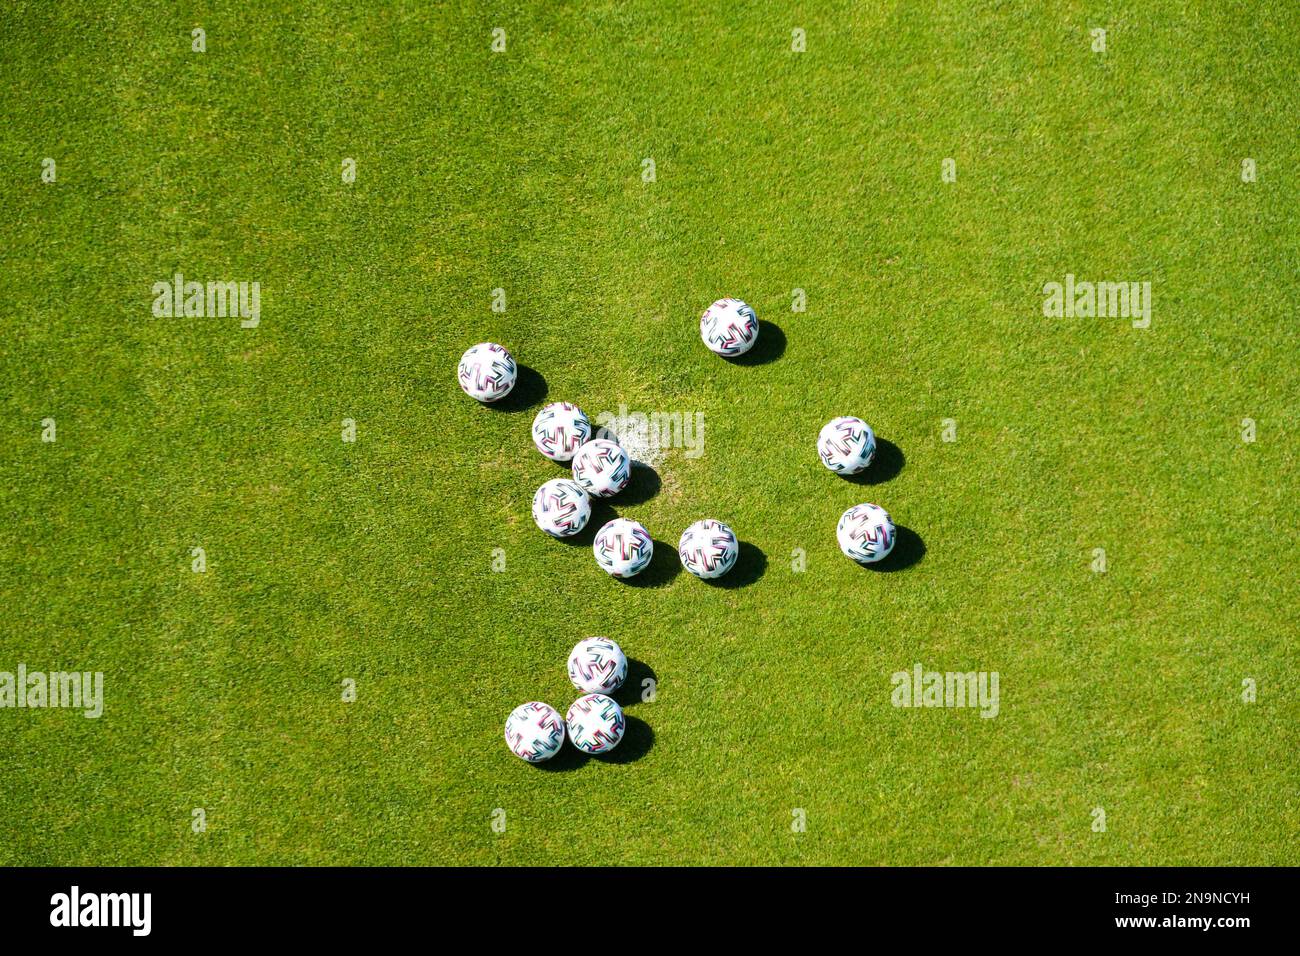 Soccer balls on soccer field top view Stock Photo